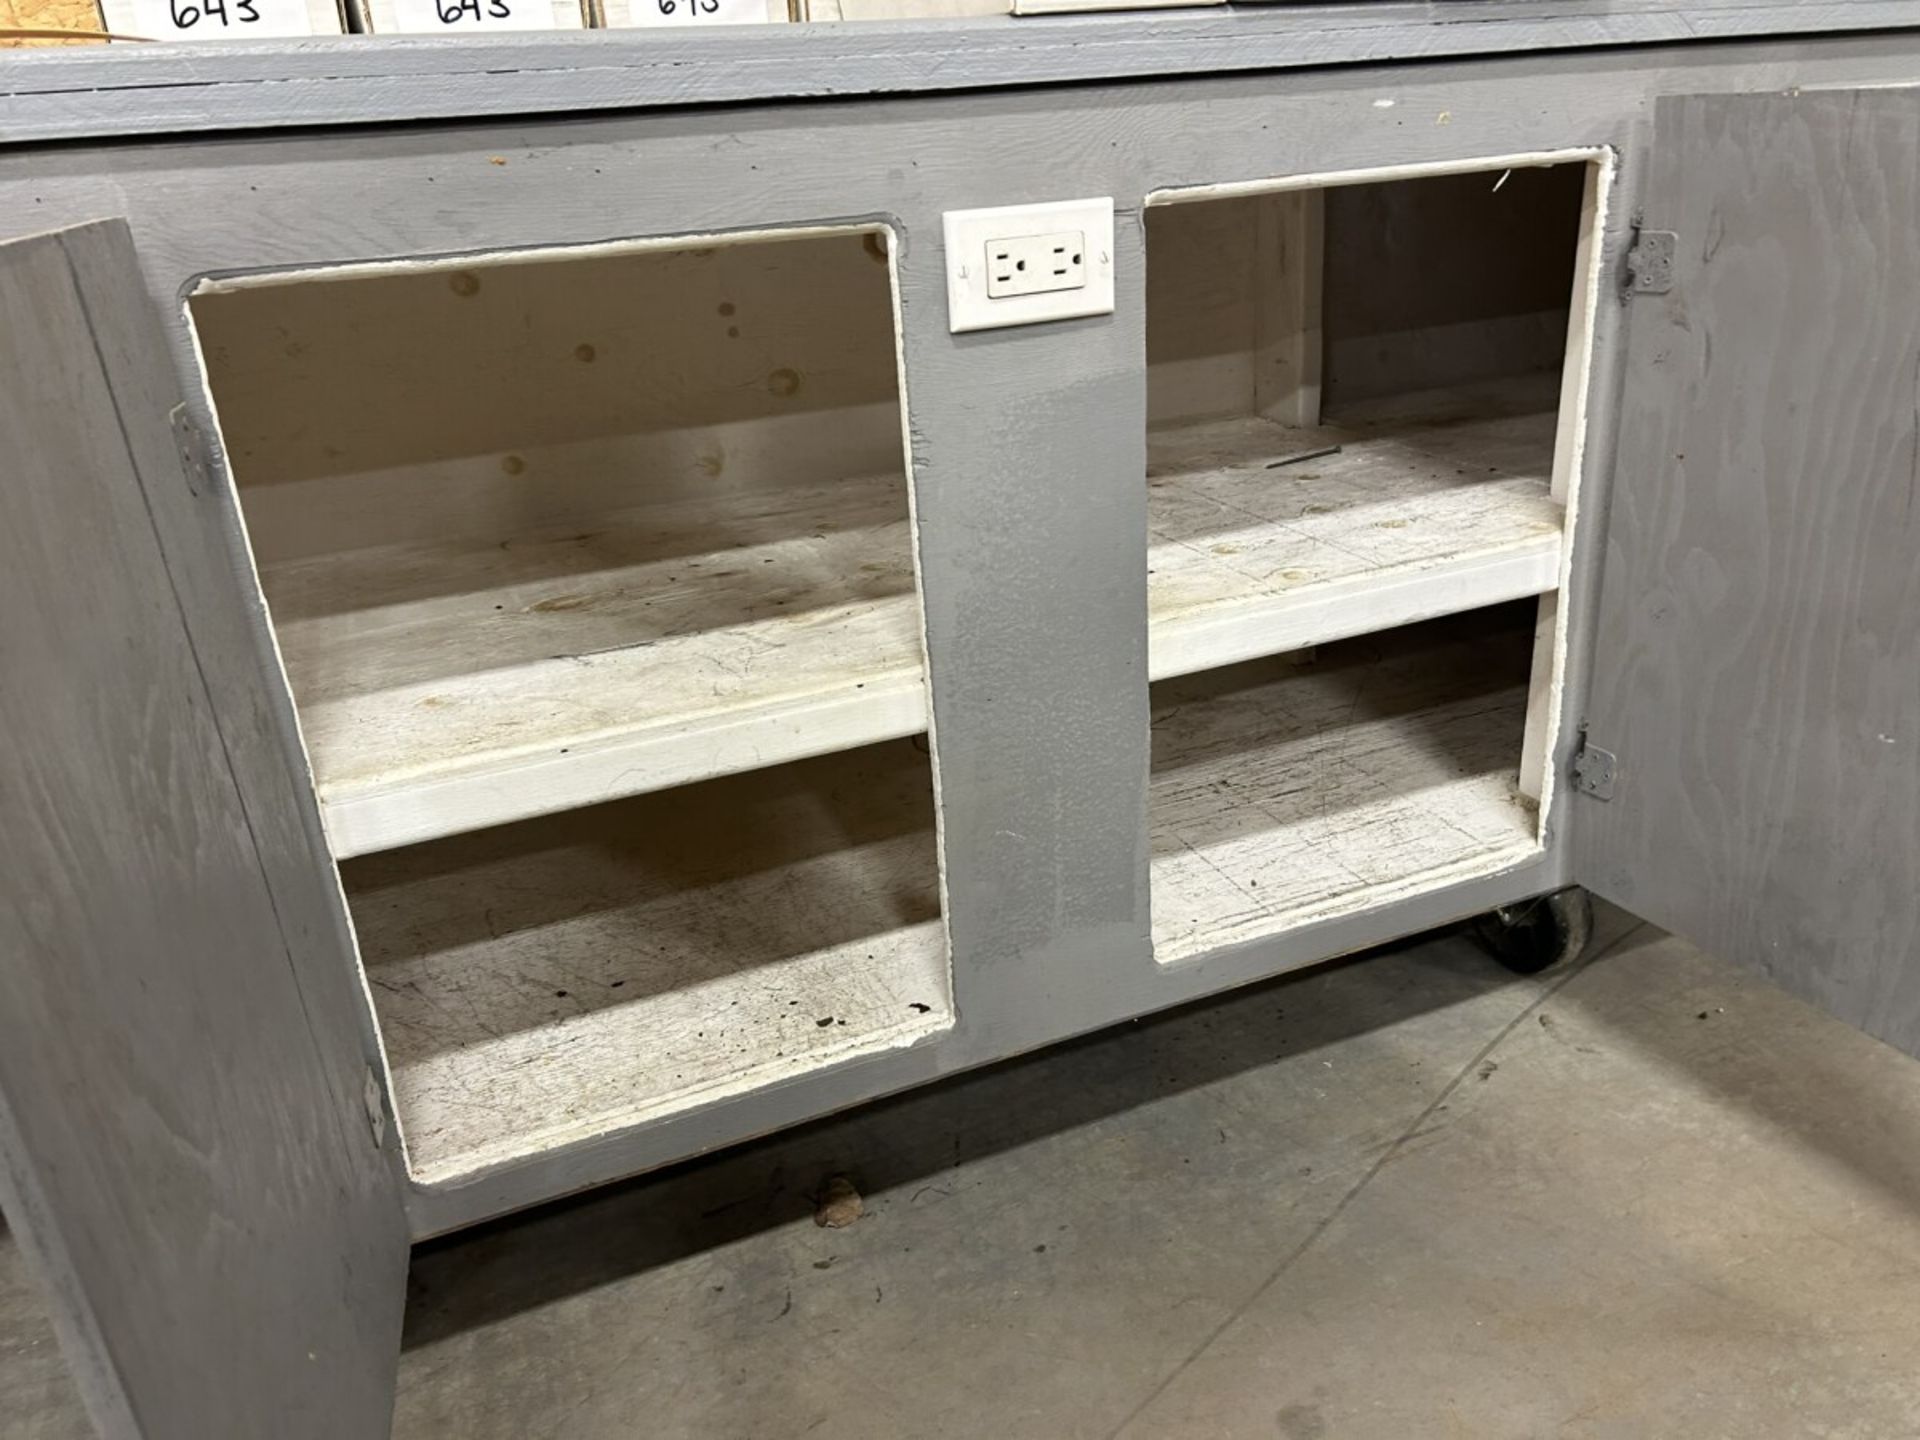 ROLLING WOODEN STORAGE CABINET 93"X24"34"H W/ INTEGRAL POWER OUTLETS - Image 3 of 4